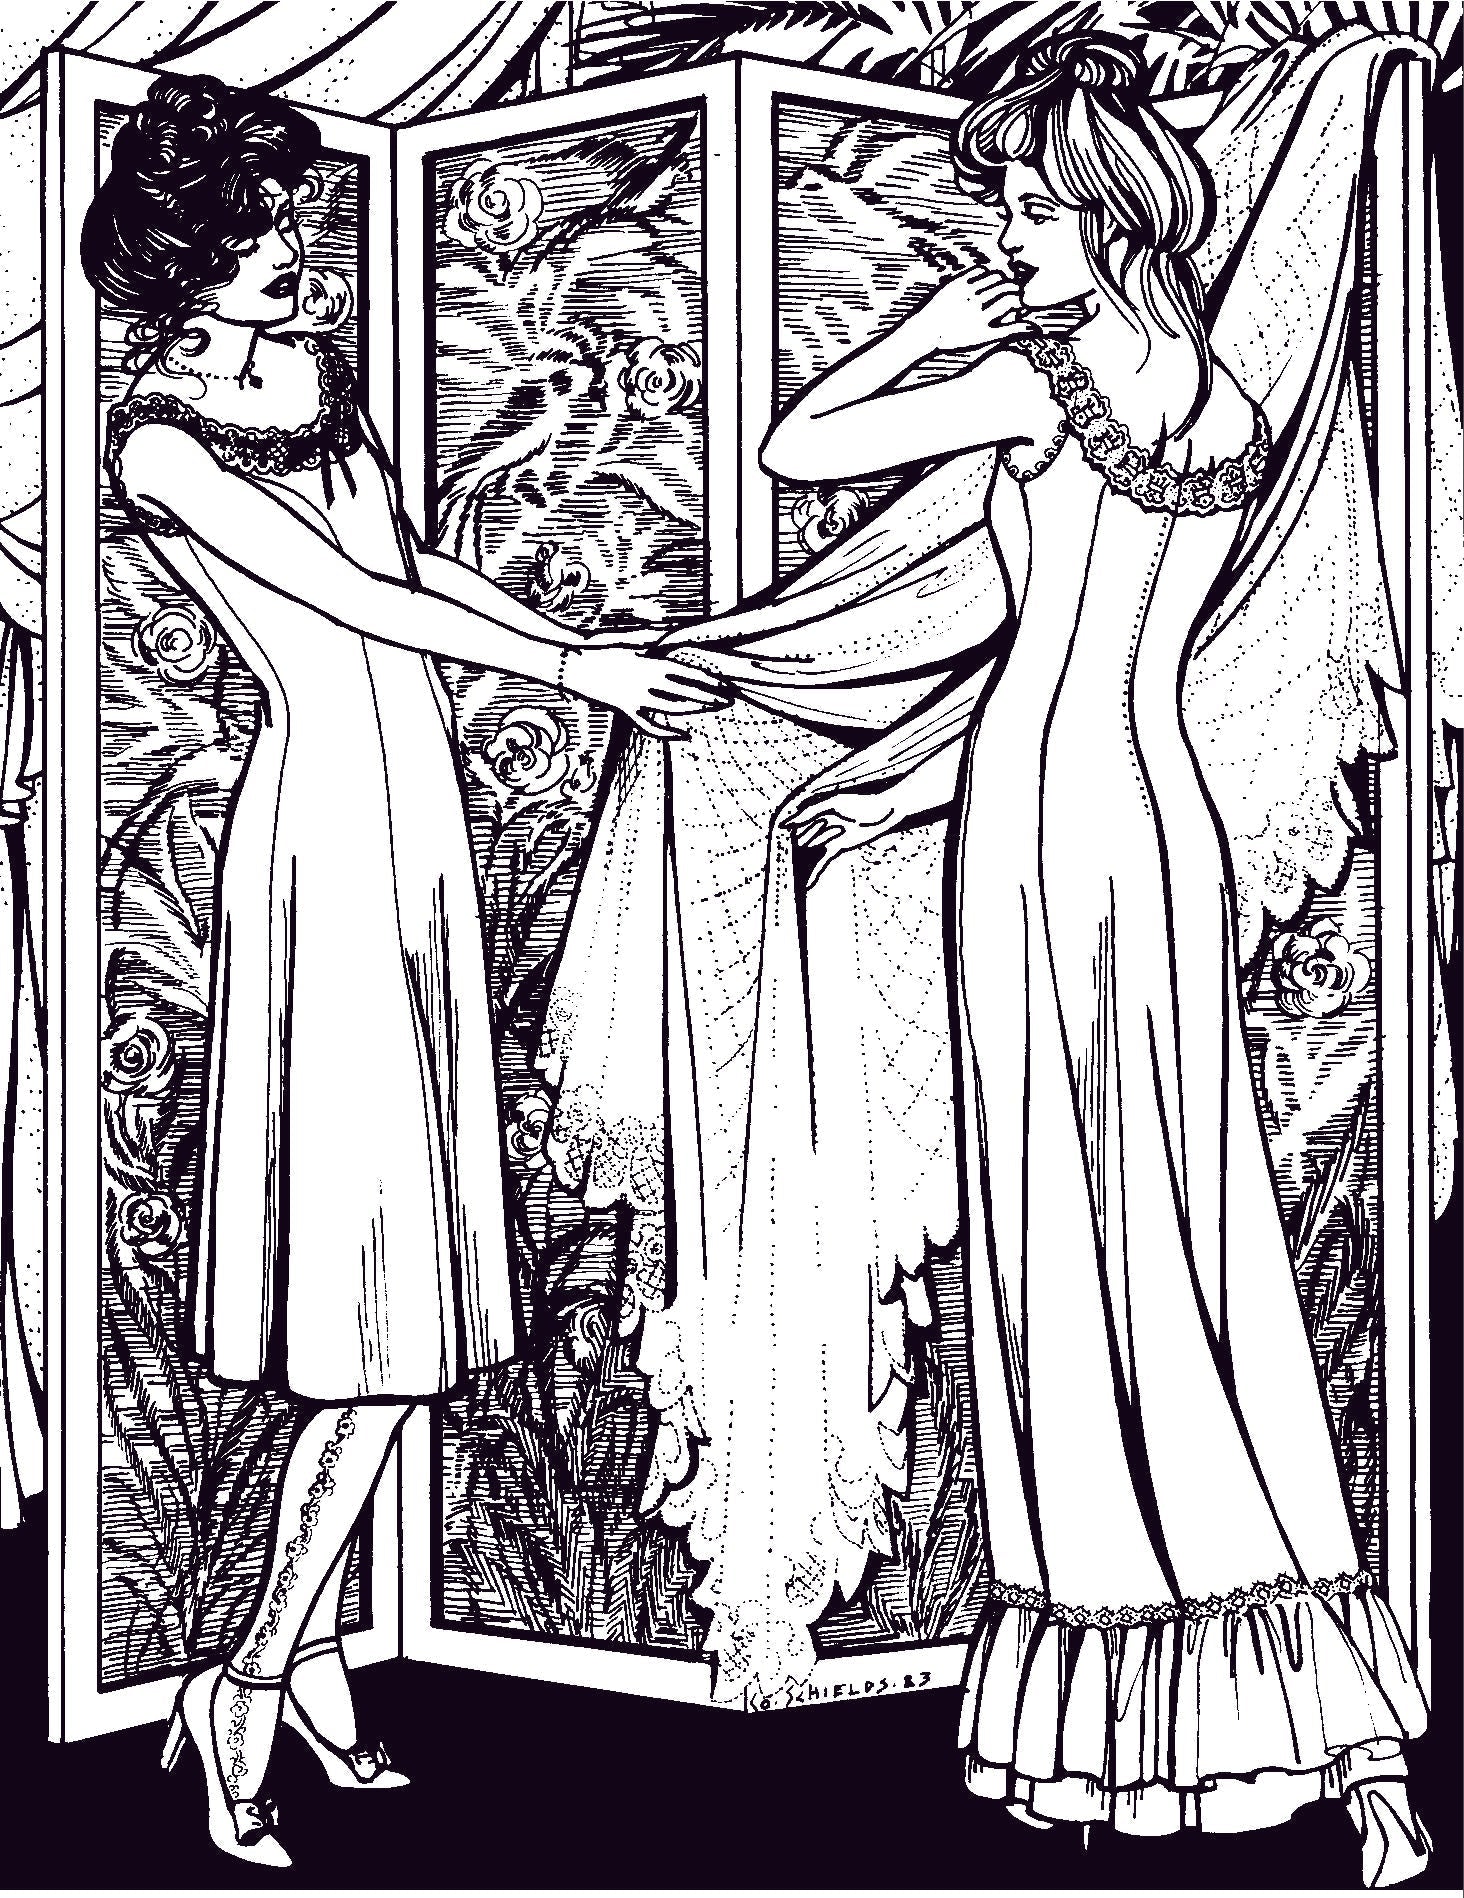 Pen and ink illustration of two women wearing the slips and looking at fabric on a dress hanging on a screen.